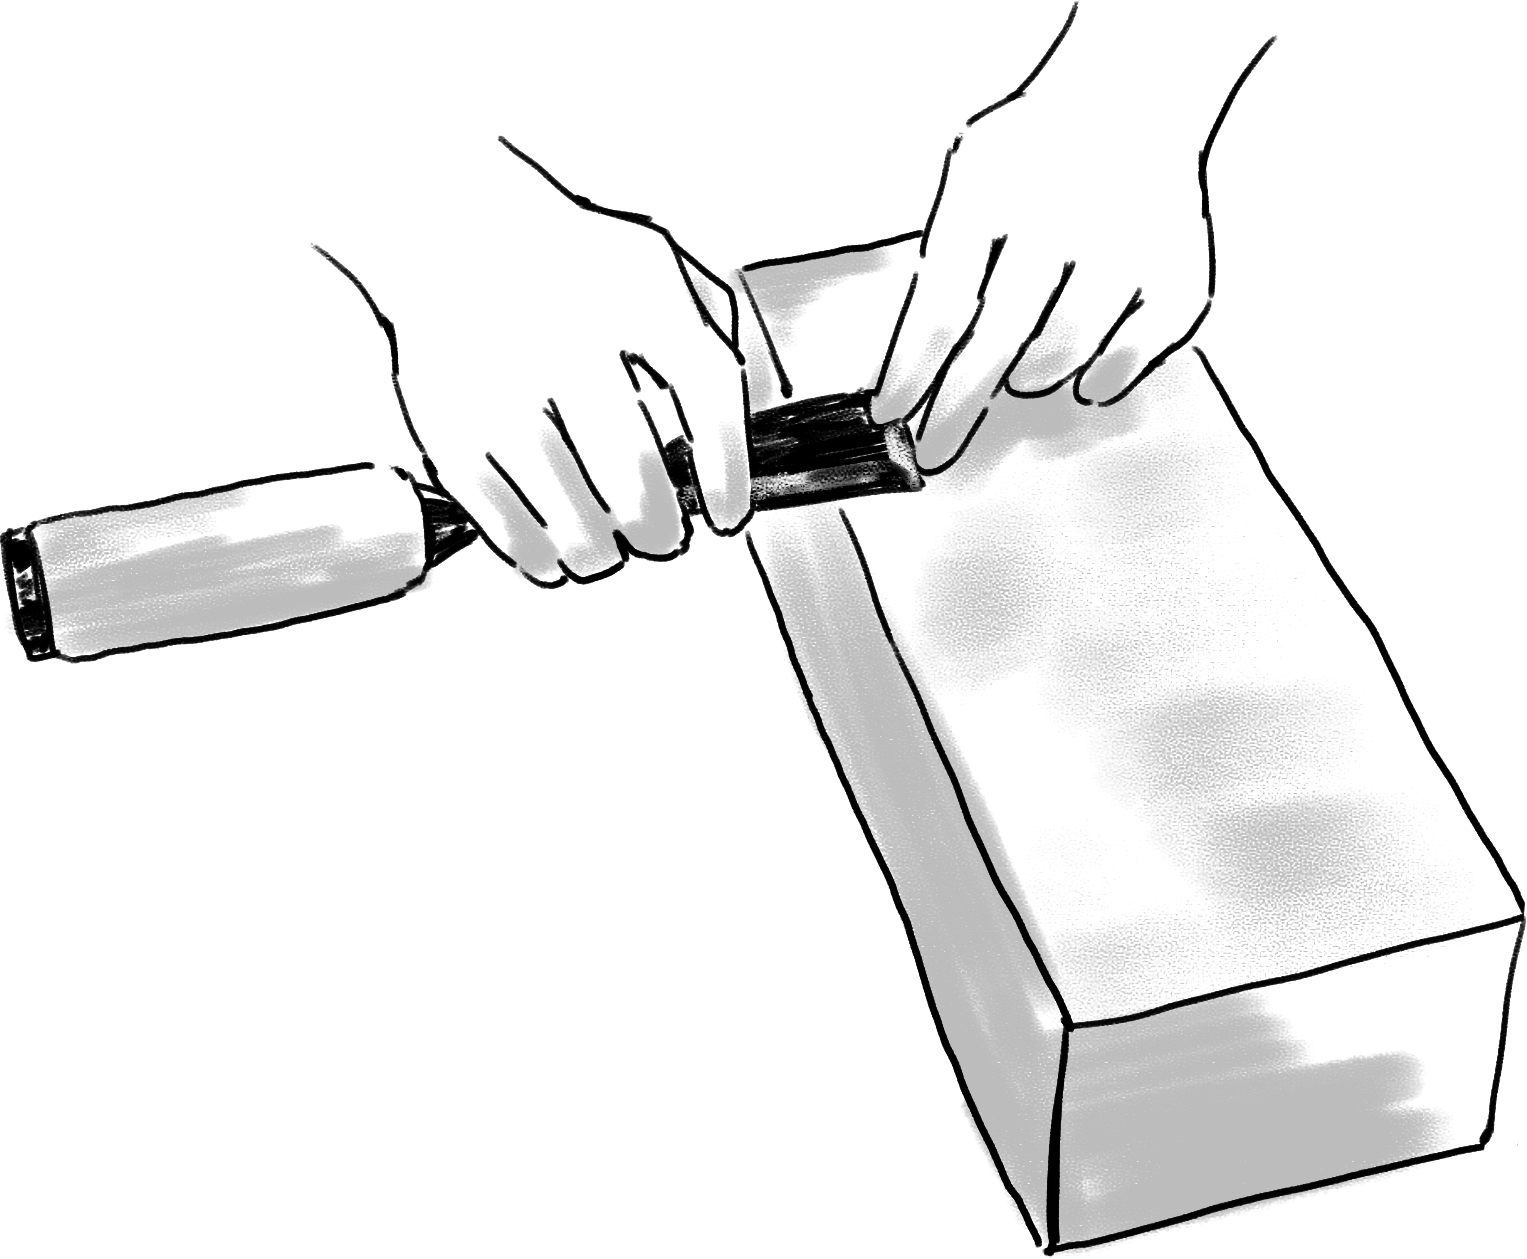 The figure of sharpening a chisel with a water stone